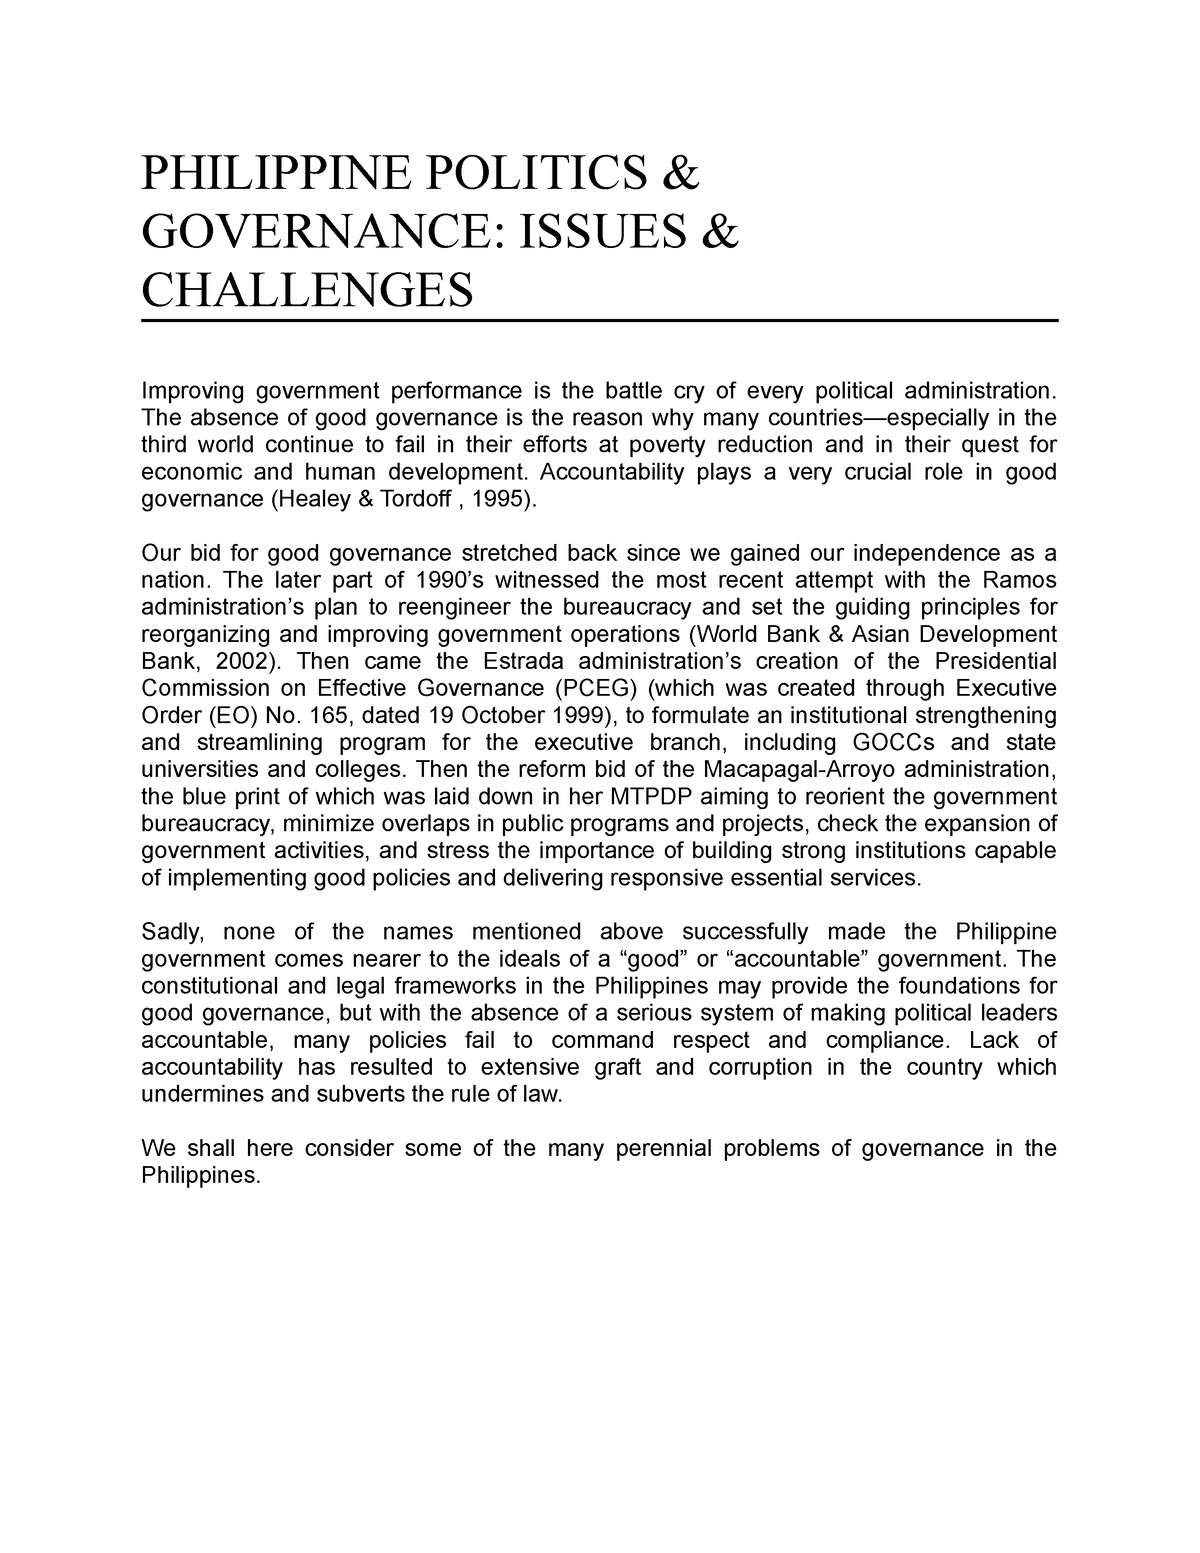 good governance in the philippines essay